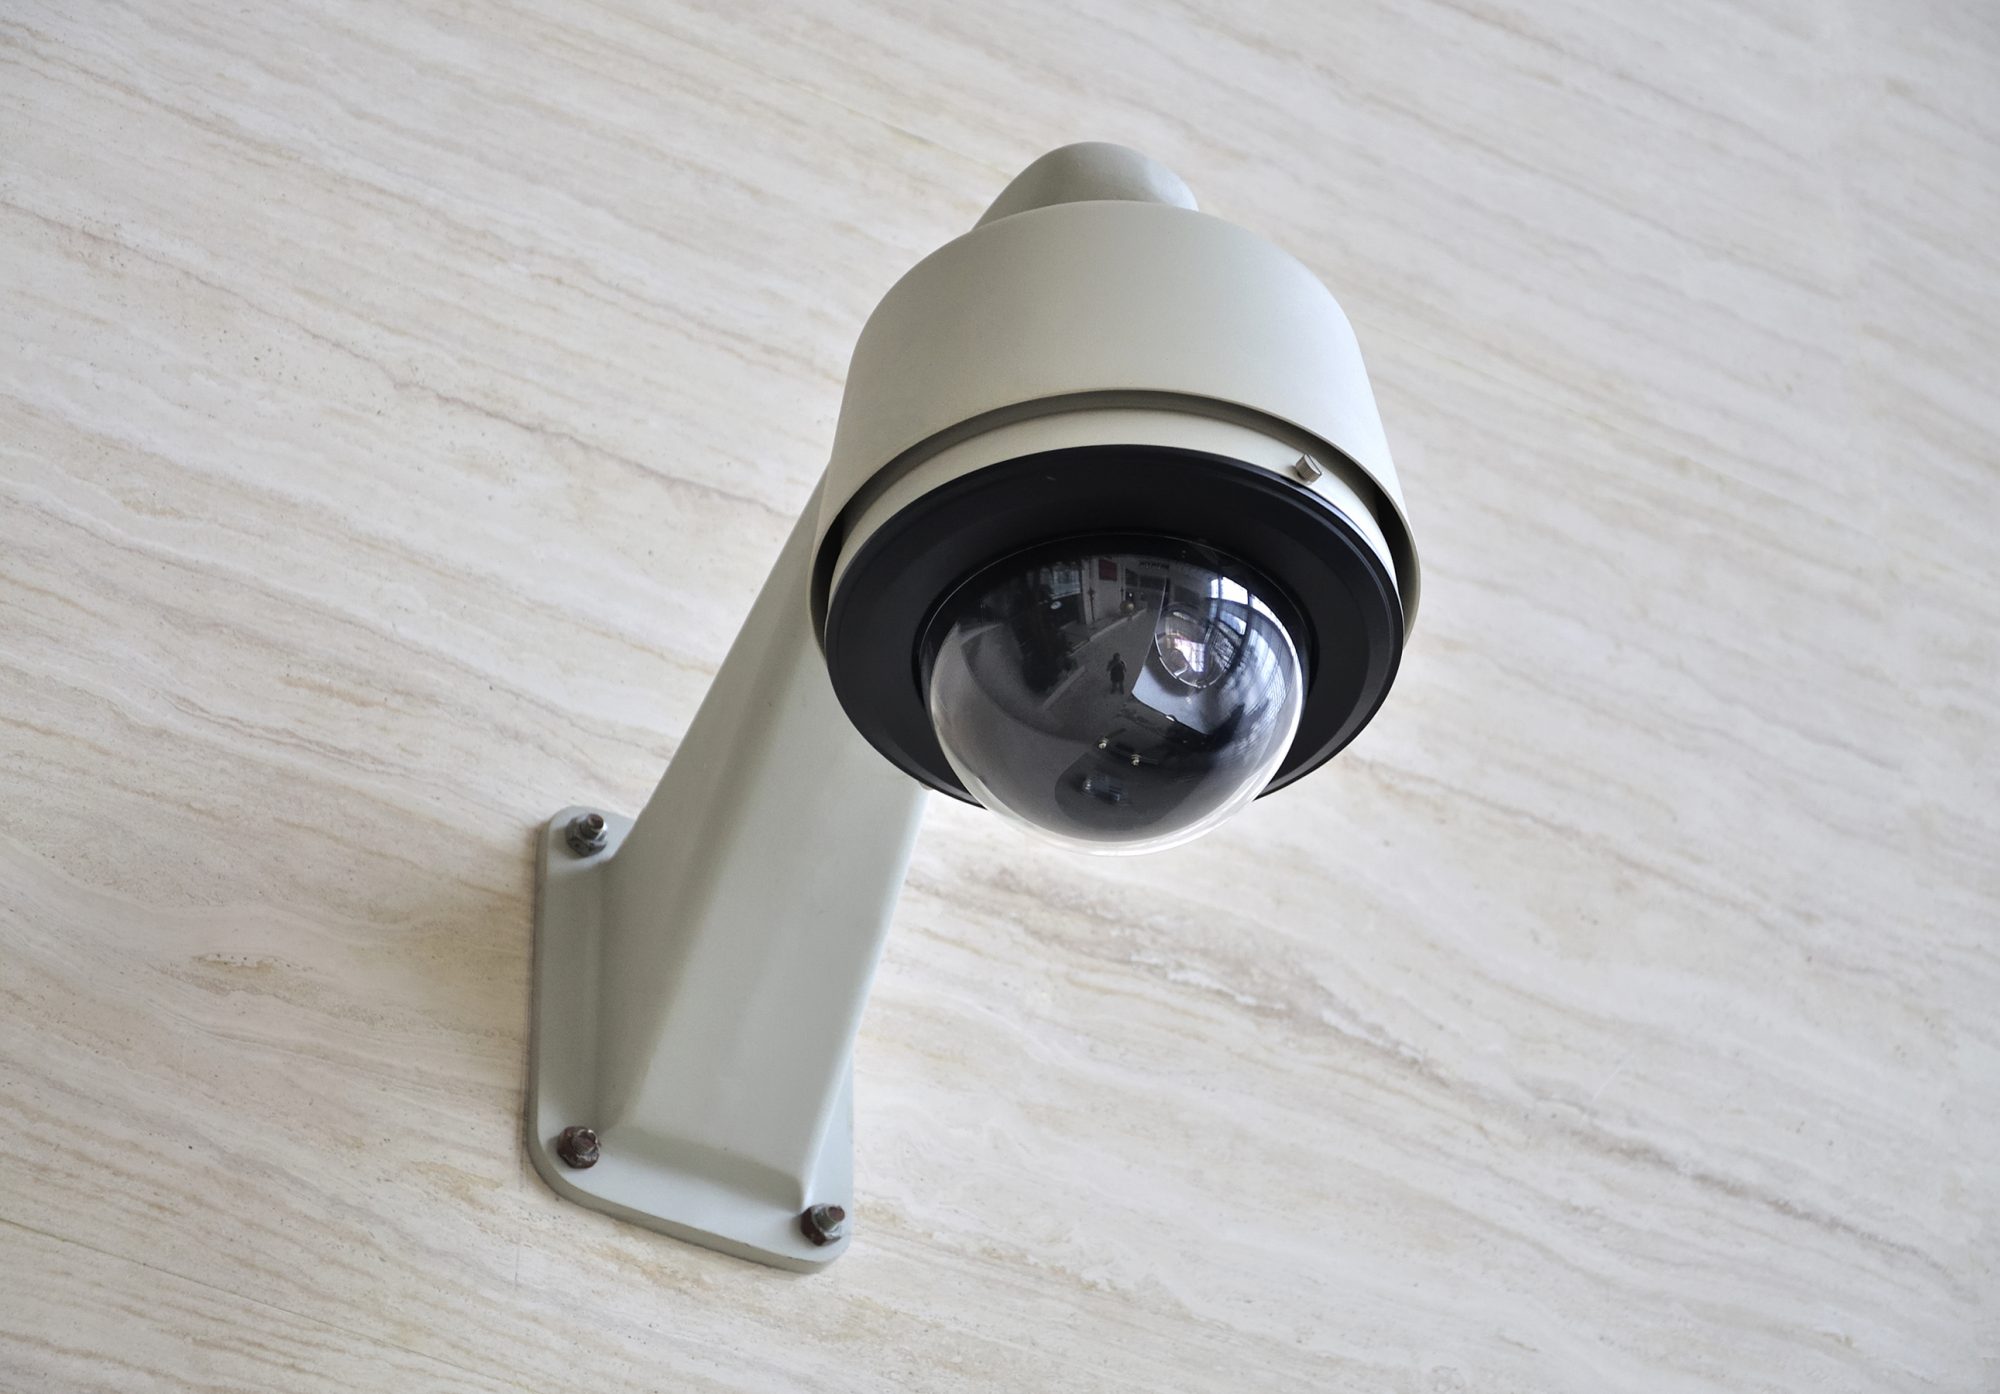 Connected camera: your home under surveillance